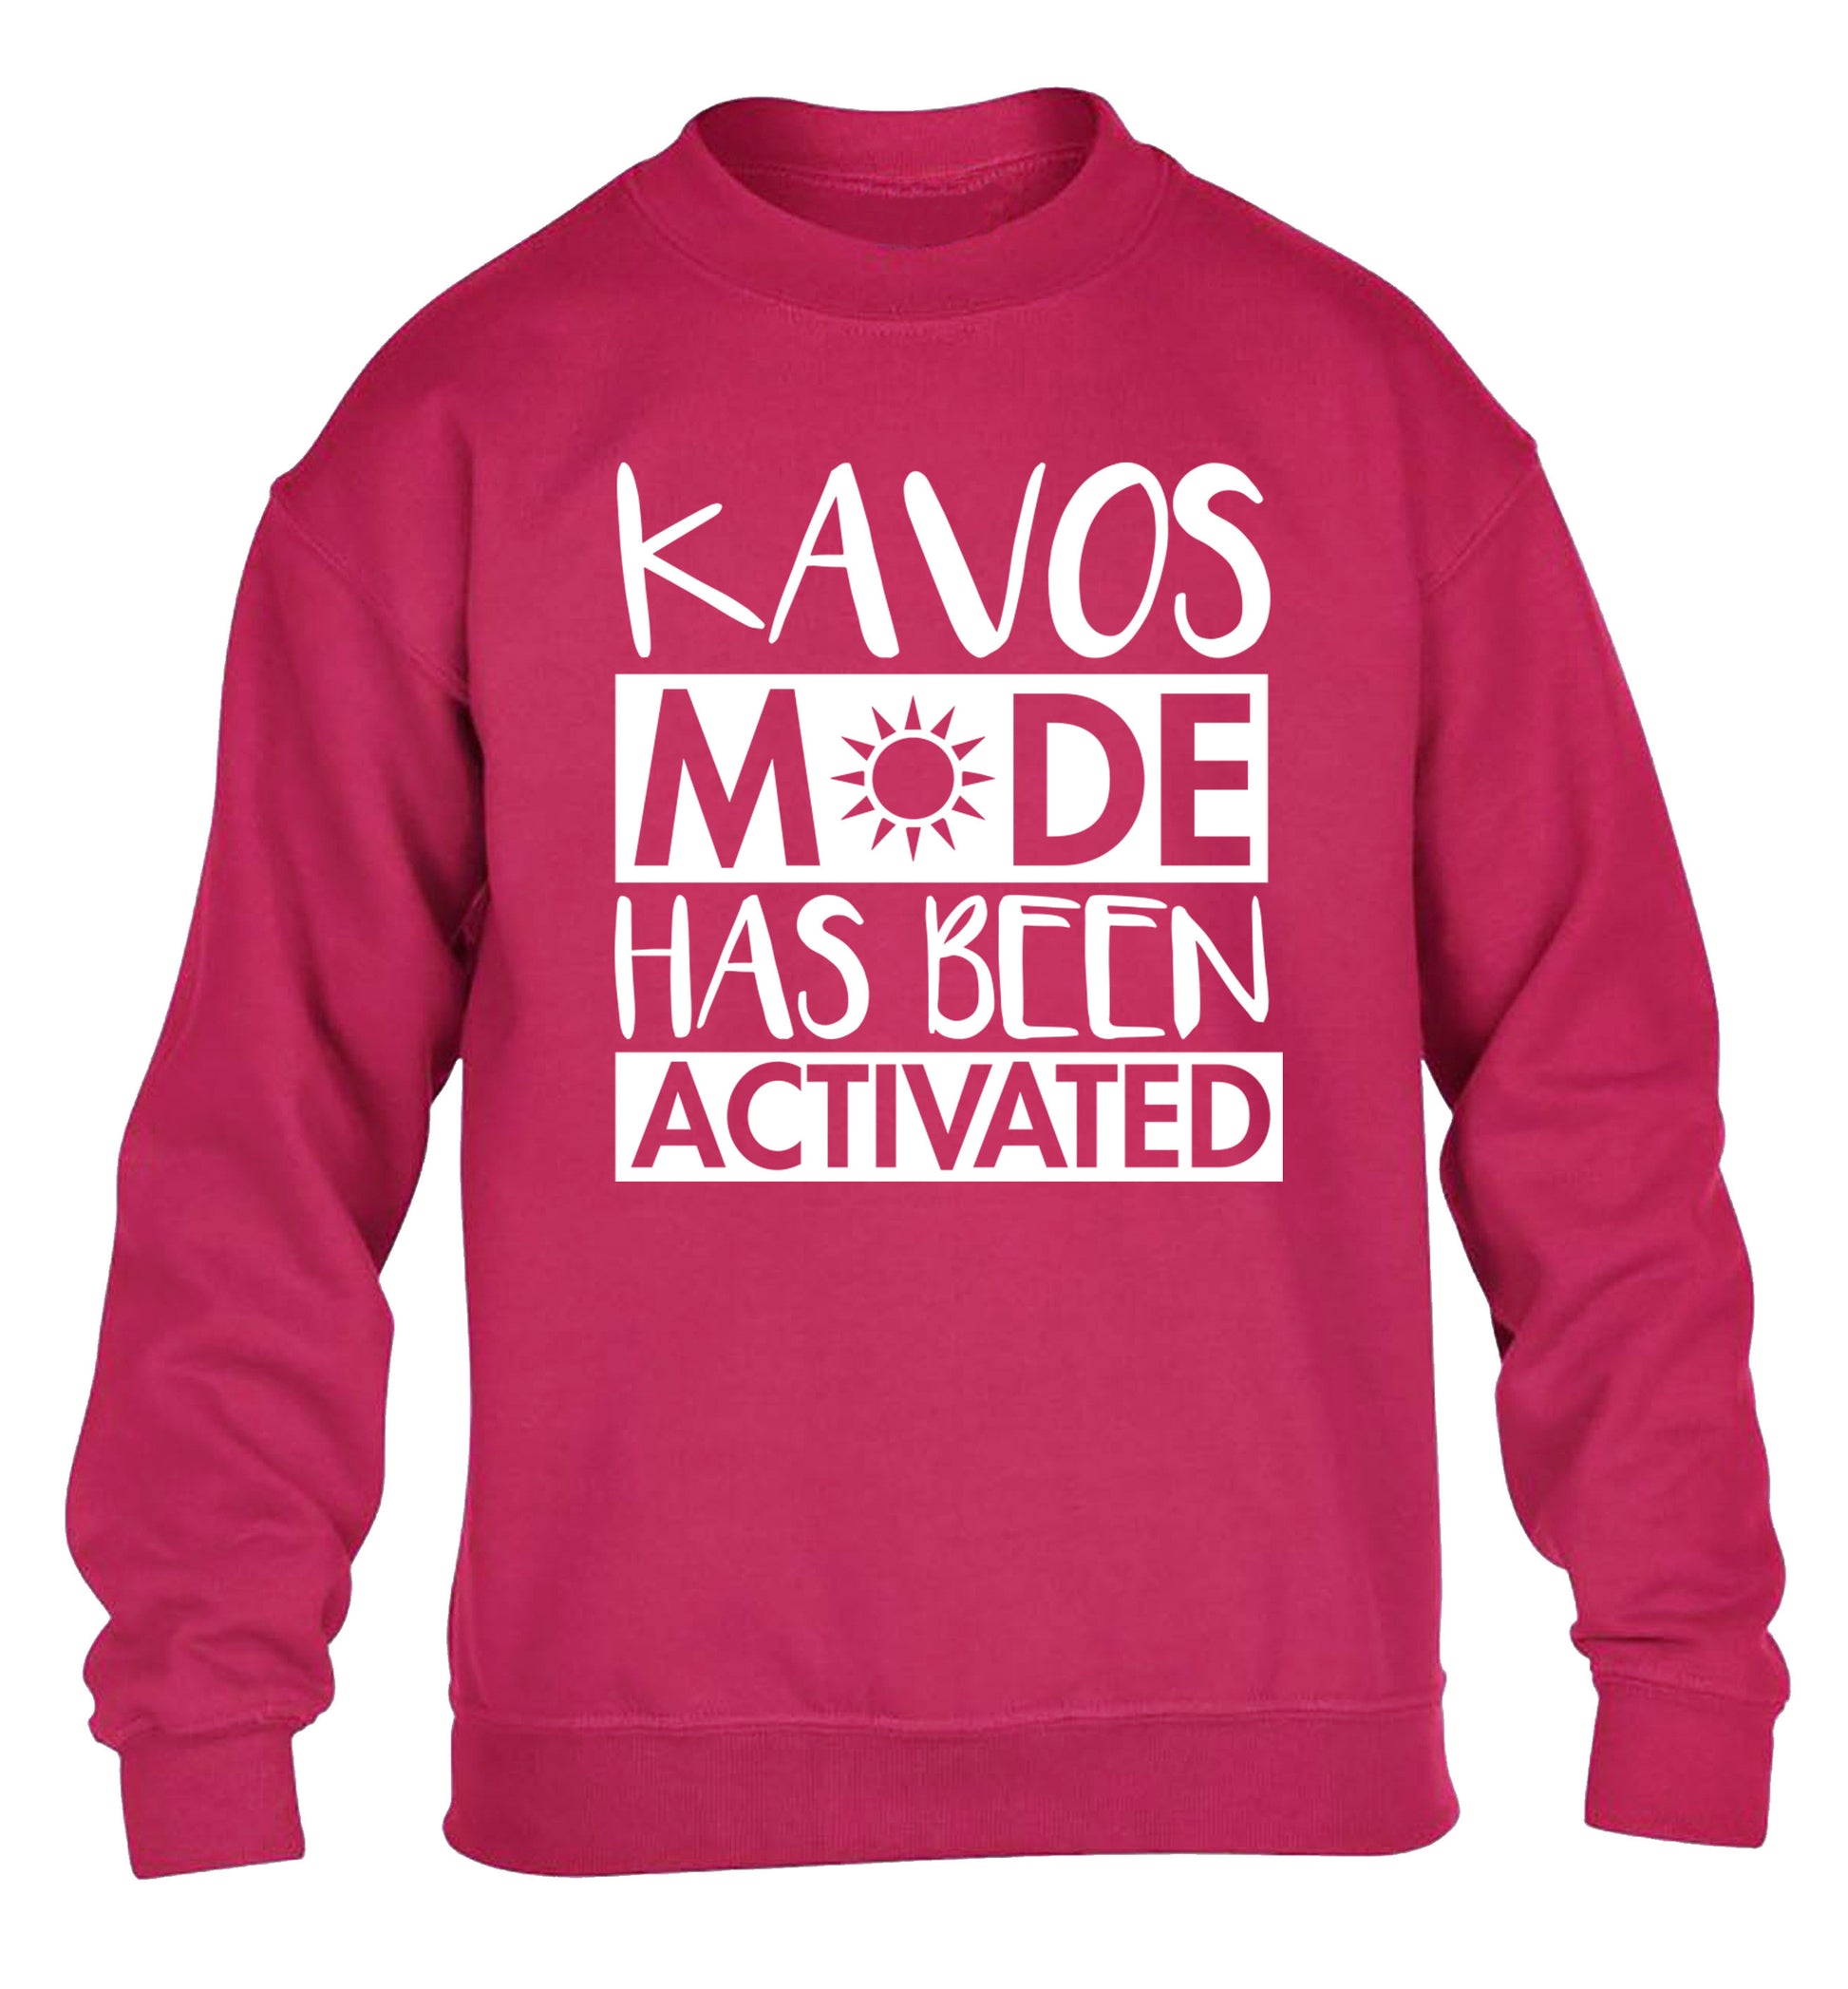 Kavos mode has been activated children's pink sweater 12-14 Years